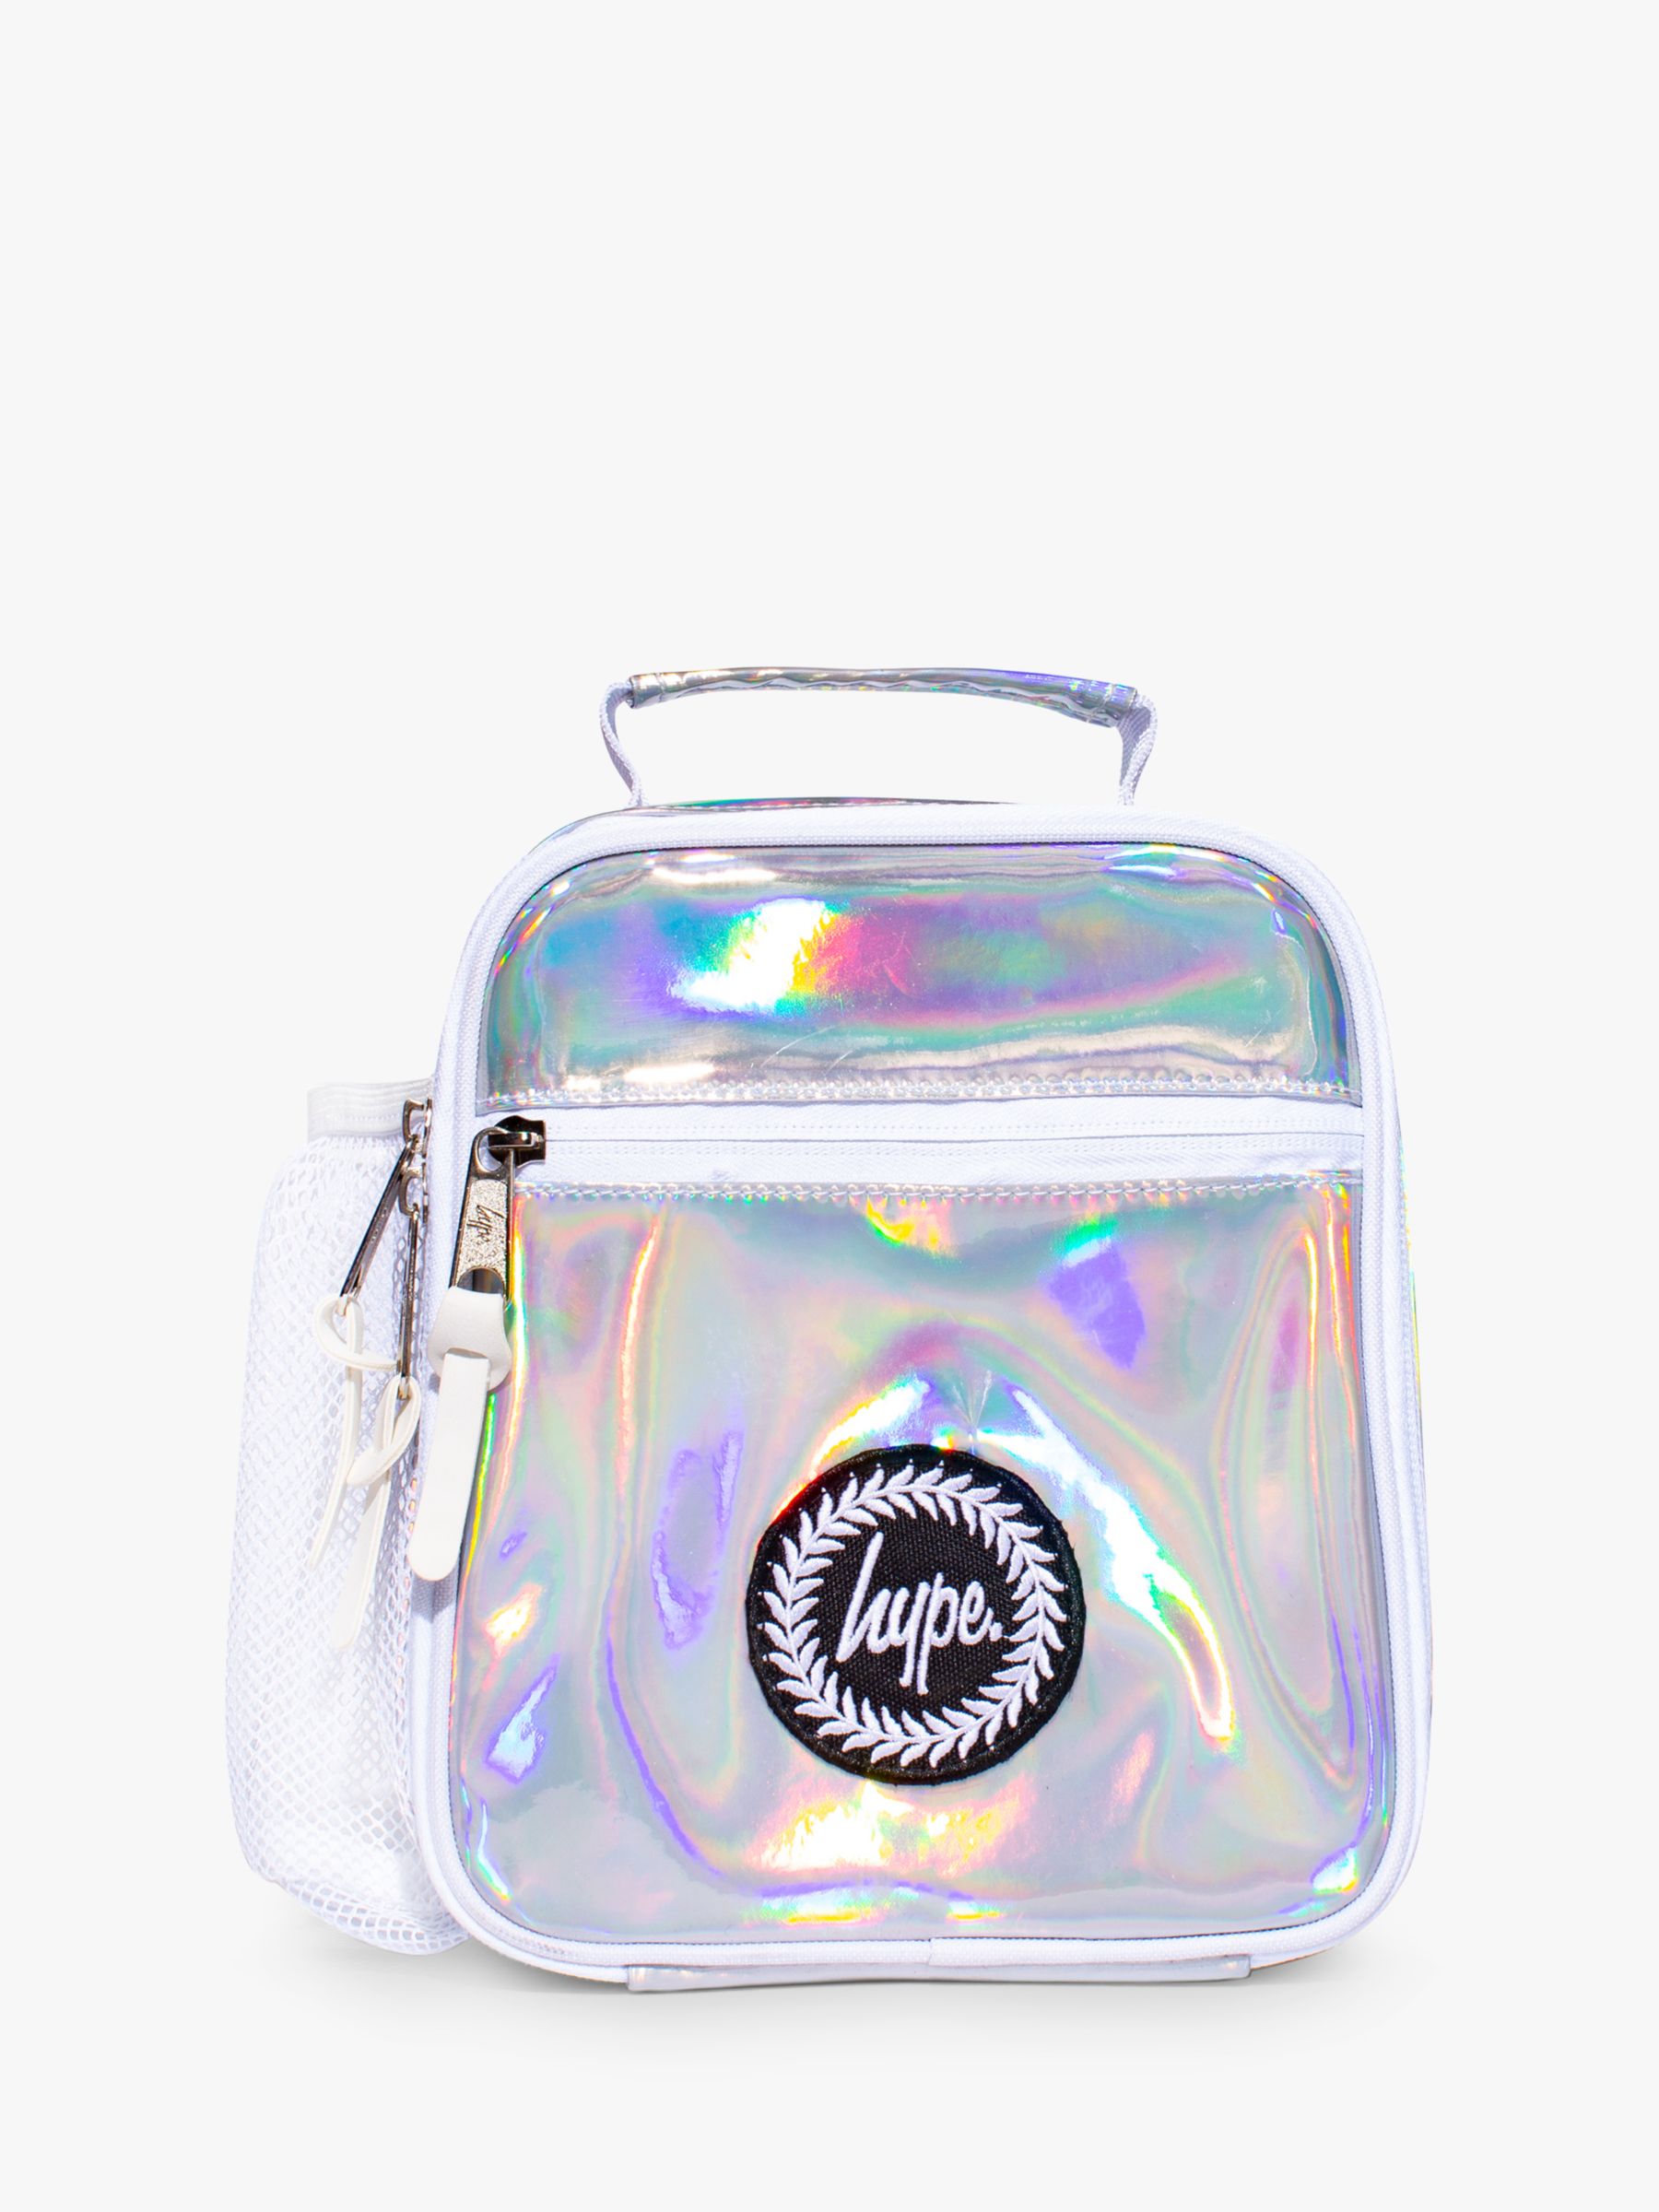 Hype Children's Holographic Lunchbox, Silver